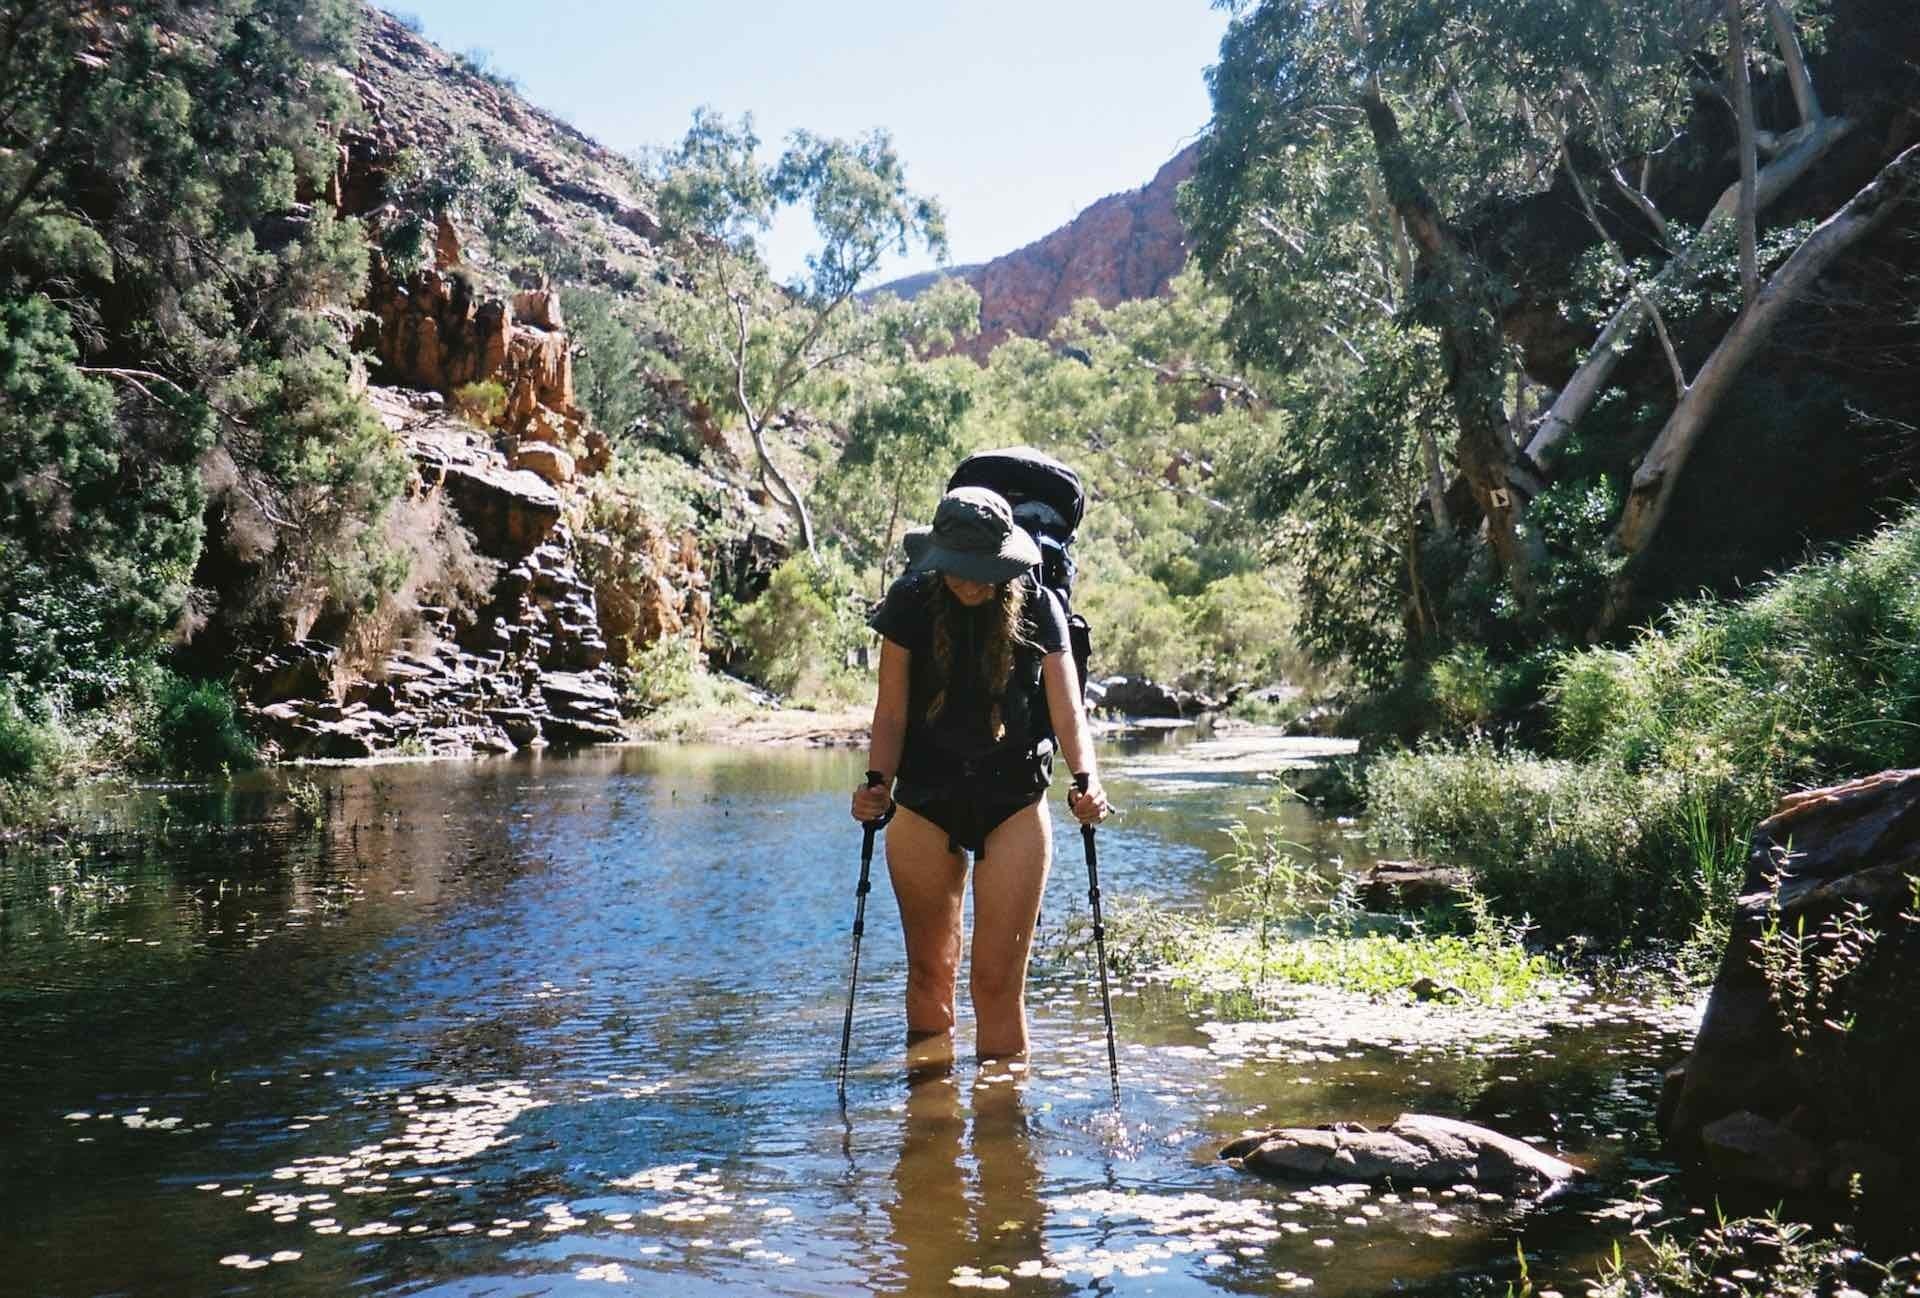 10 Things You Need to Know Before Hiking The Larapinta Trail, Ruby Claire, Central Australia, gorge, river, woman, hike, wade, hiking poles